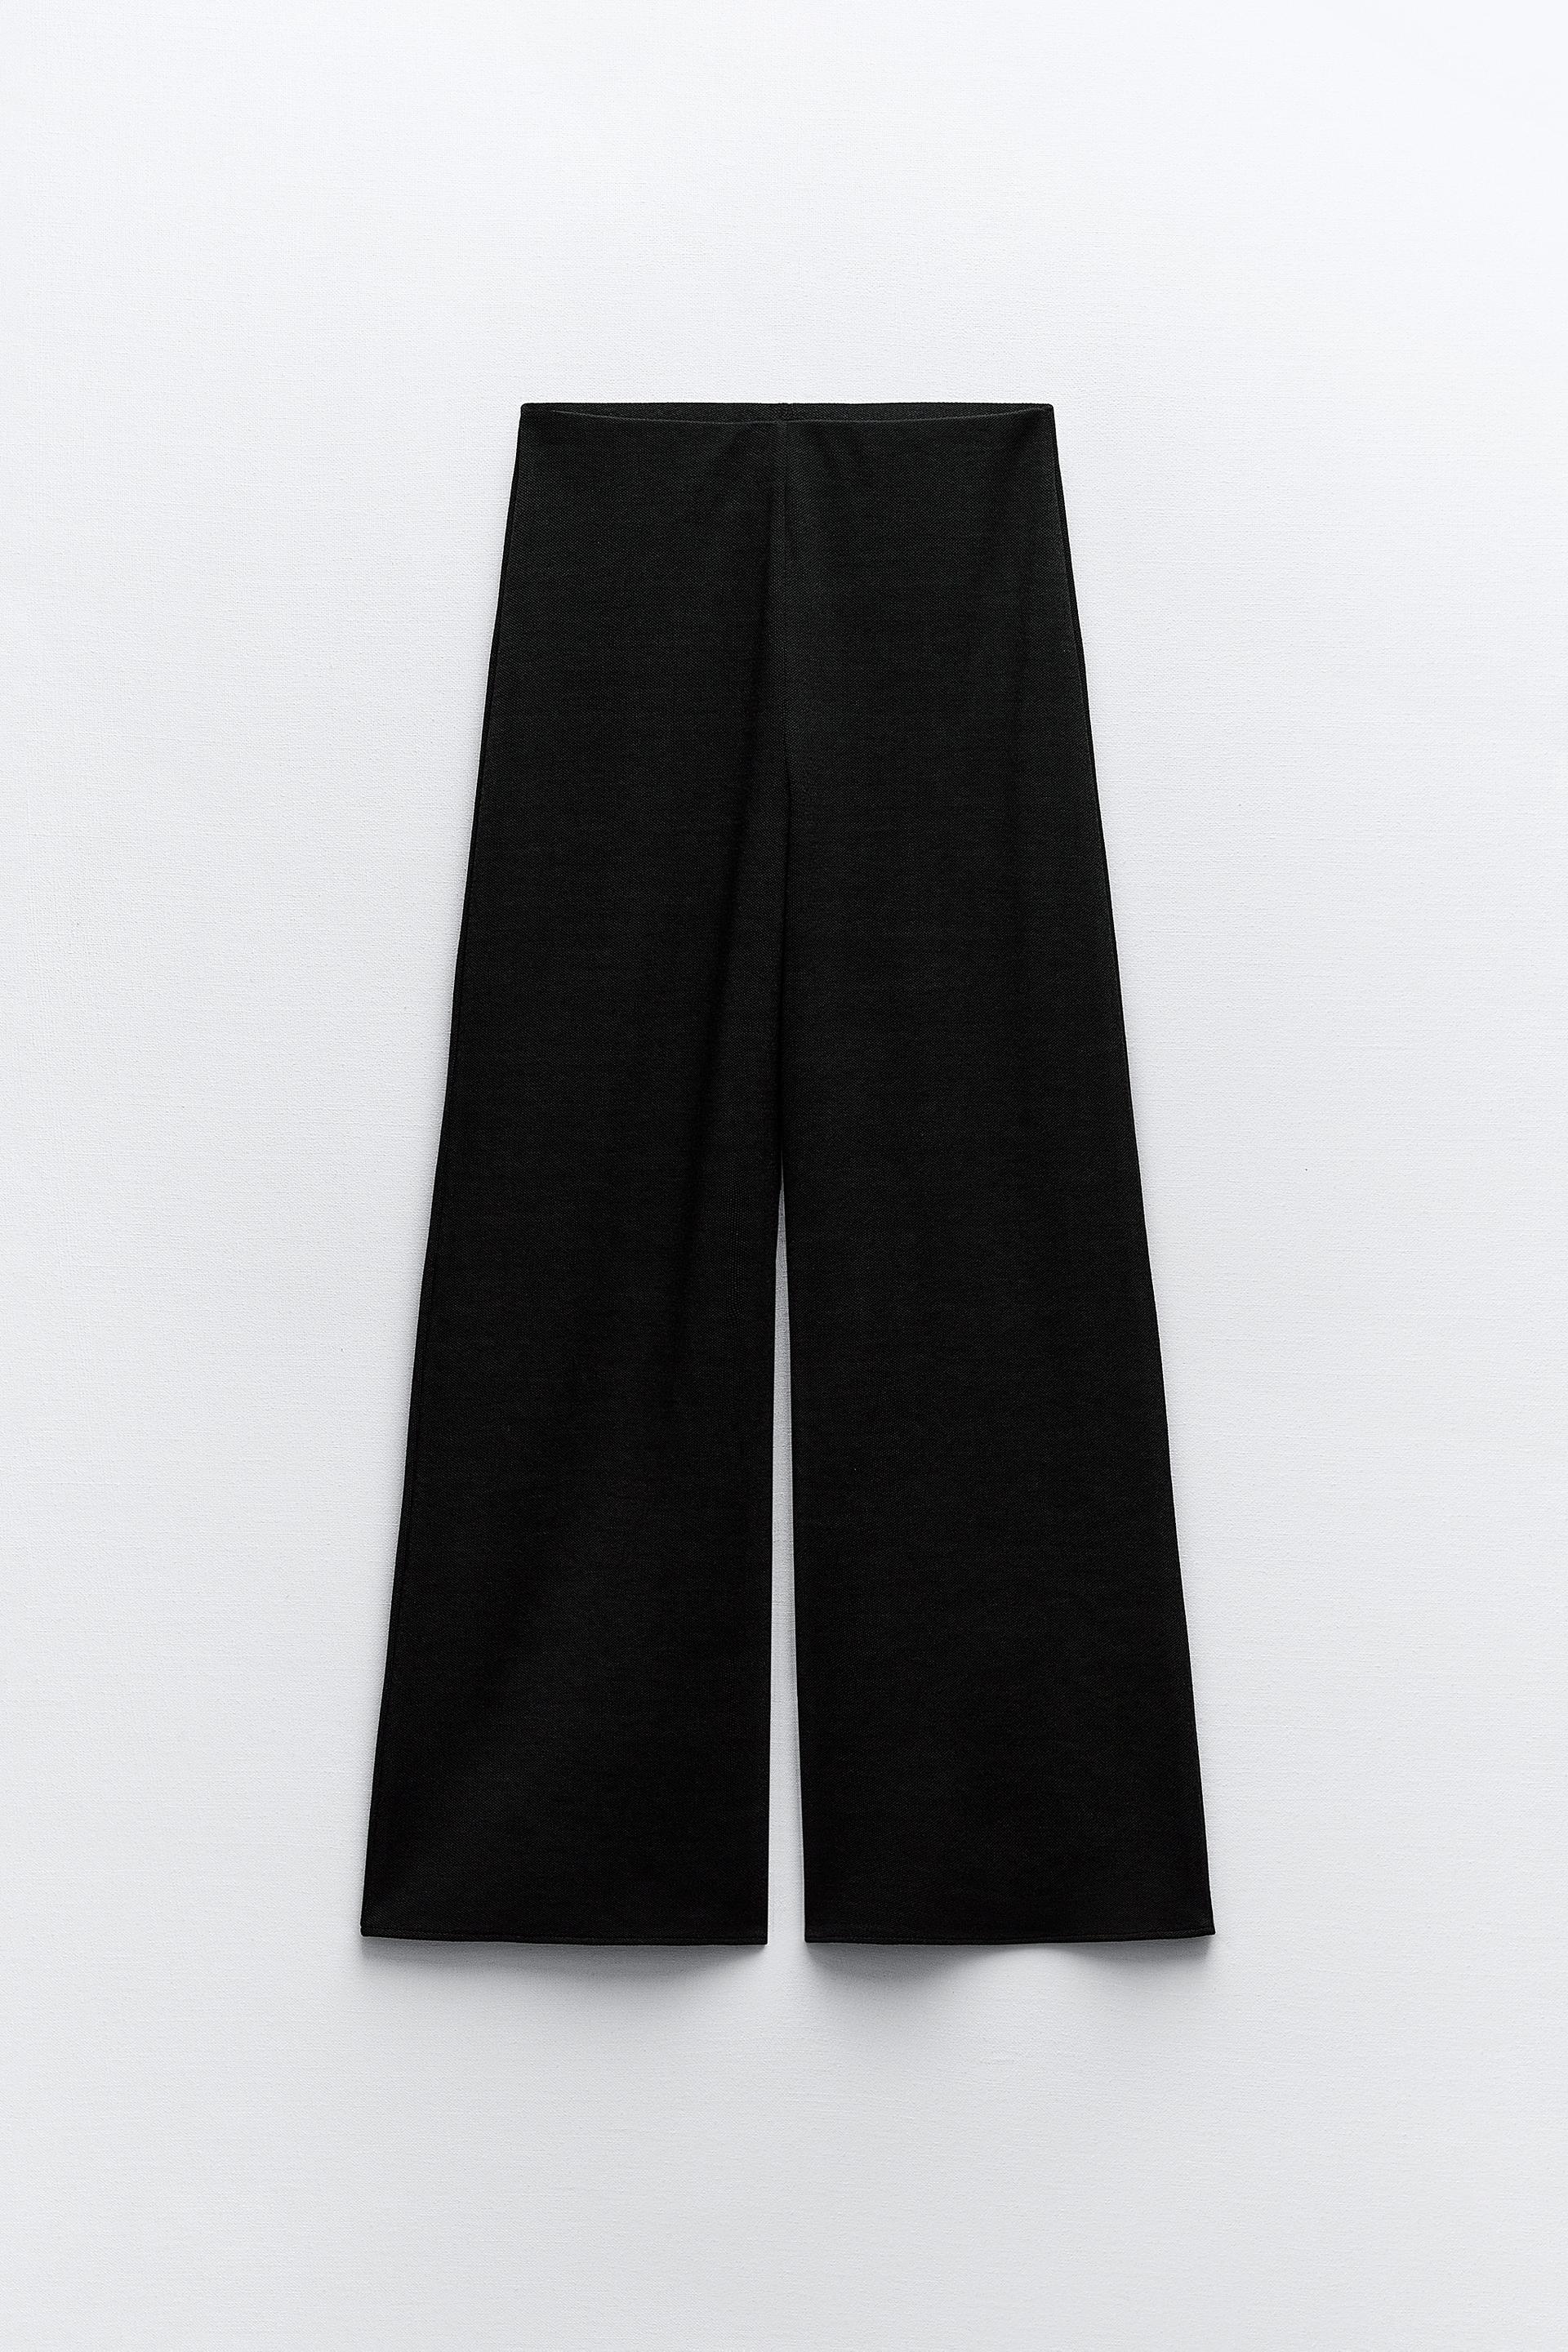 ZARA NEW WOMAN SS collection WIDE LEG PANTS LIMITED EDITION STONE XS-XL  7962/999